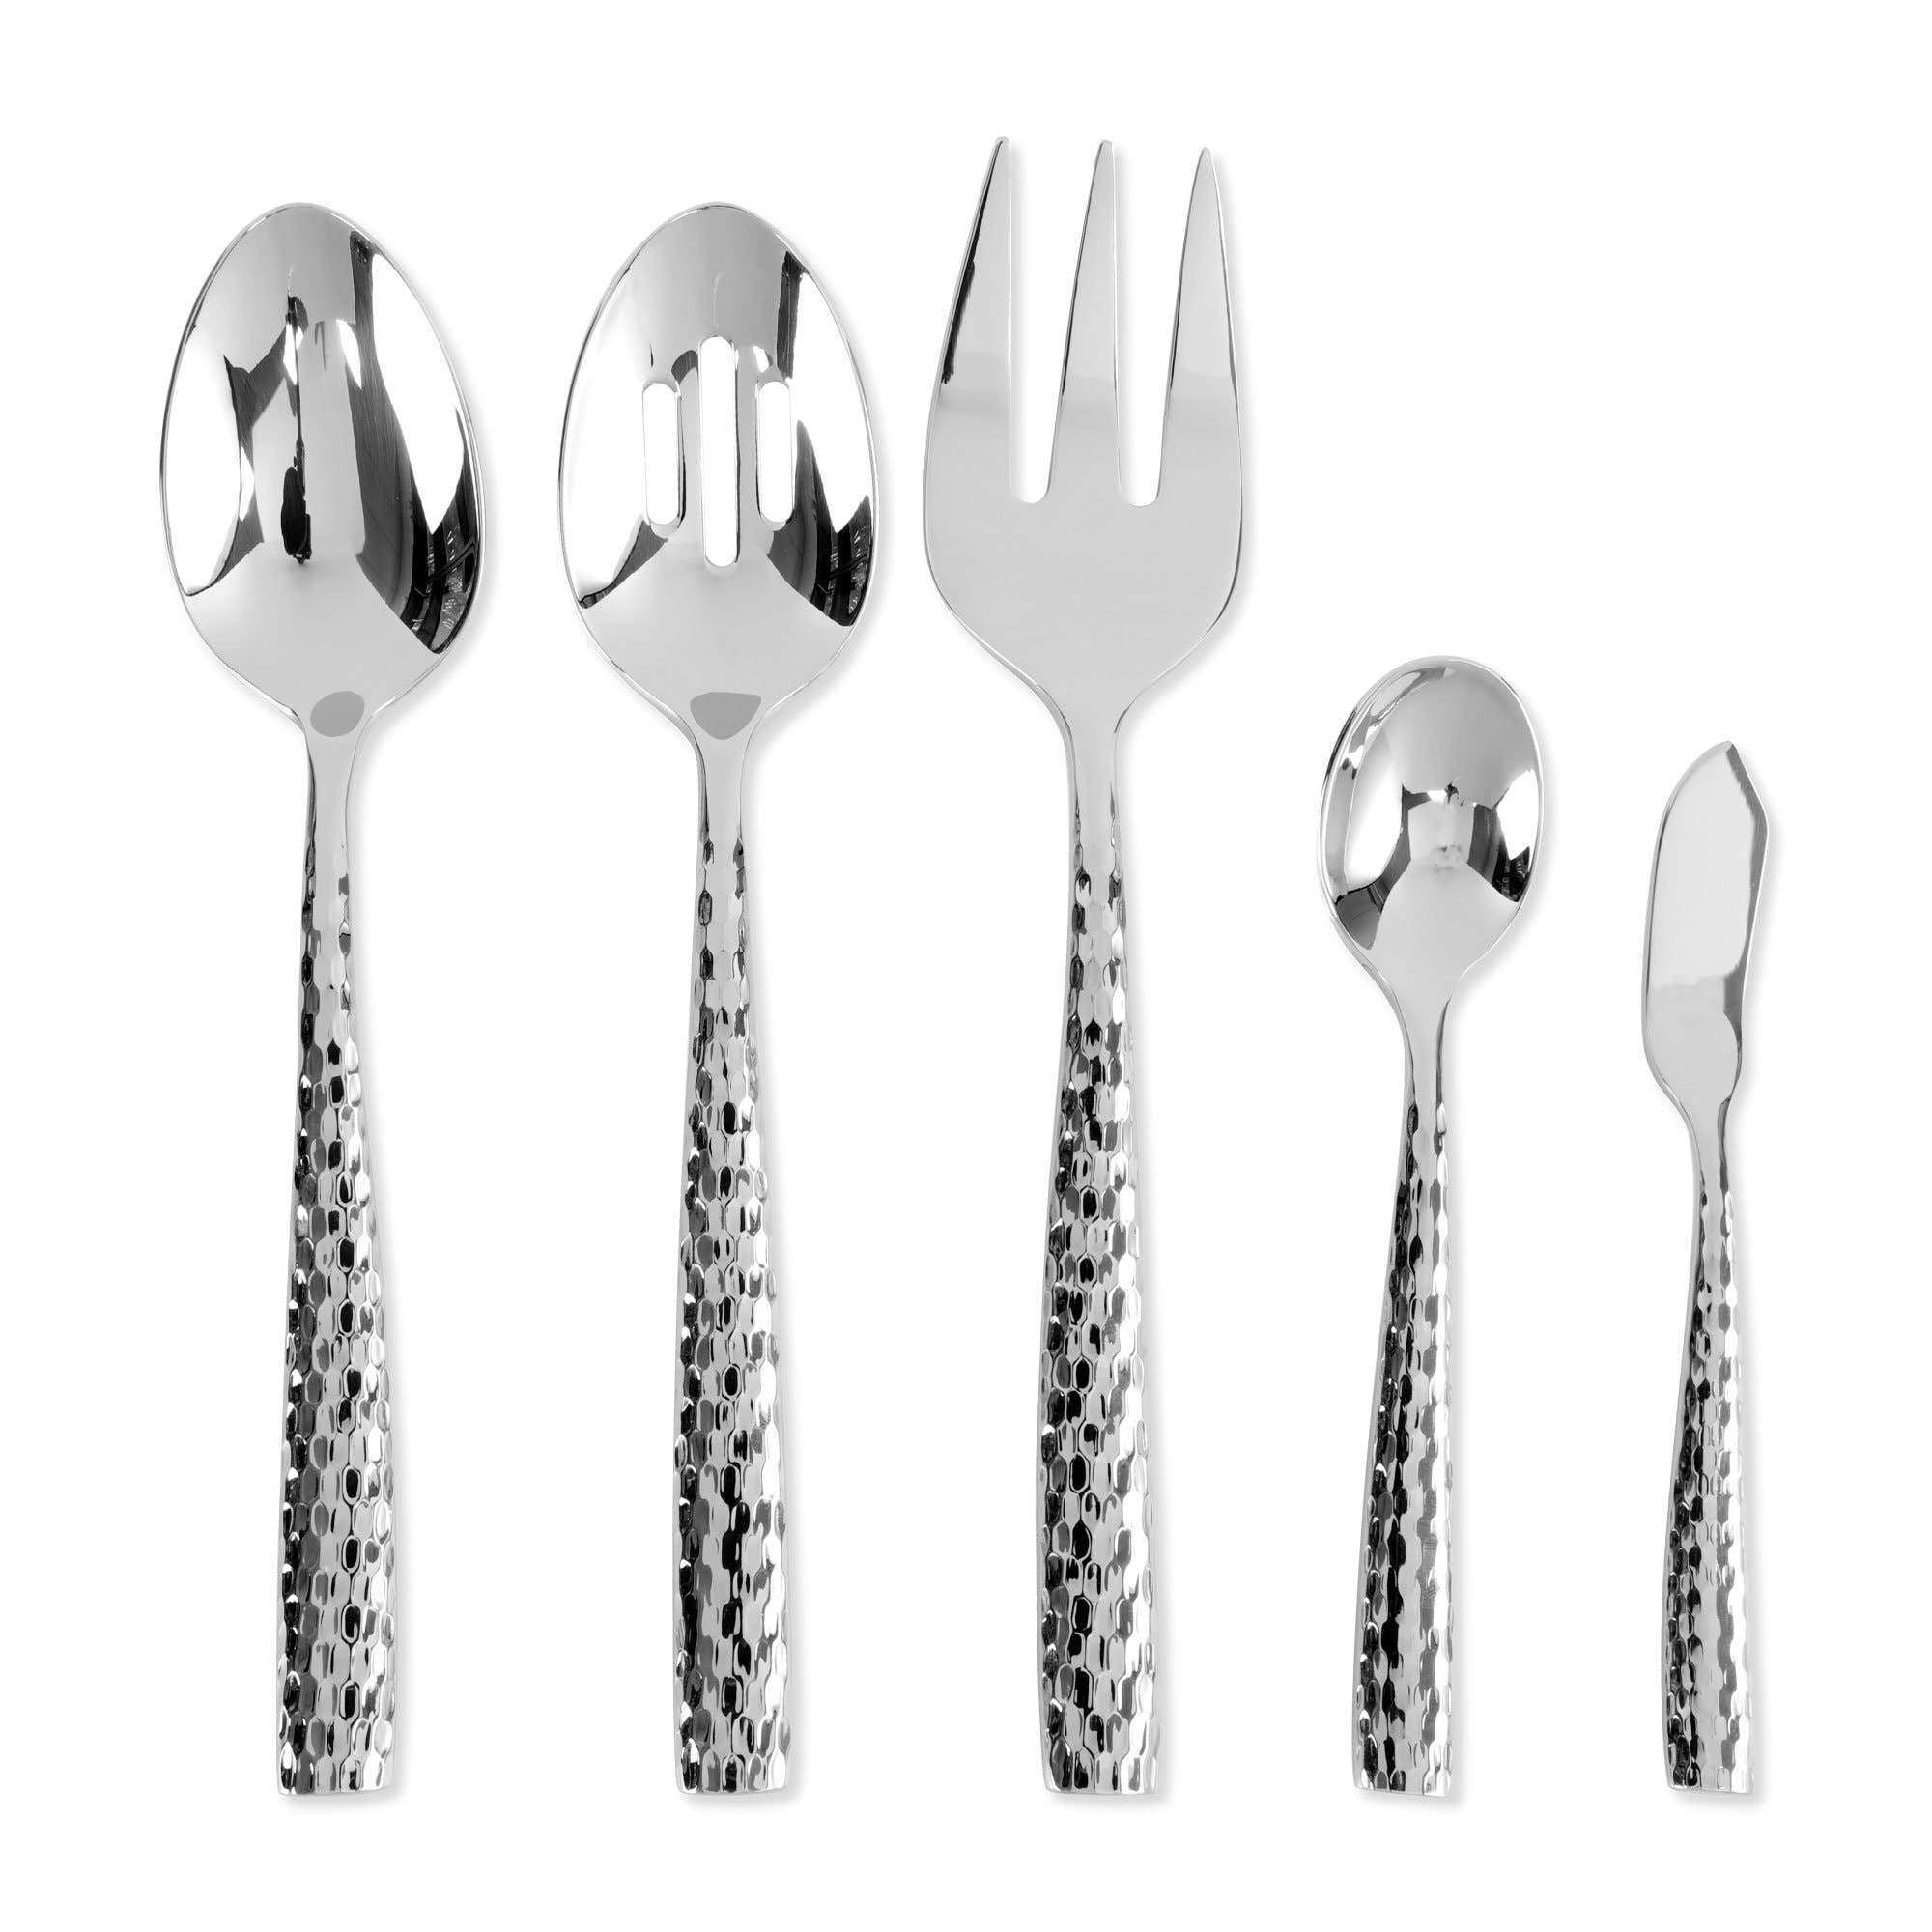 https://ak1.ostkcdn.com/images/products/is/images/direct/c239832854e2b181af2e9a60b82cfc74db330f4c/UPware-5-Piece-18-8-Stainless-Steel-Martello-Hostess-Serving-Set.jpg